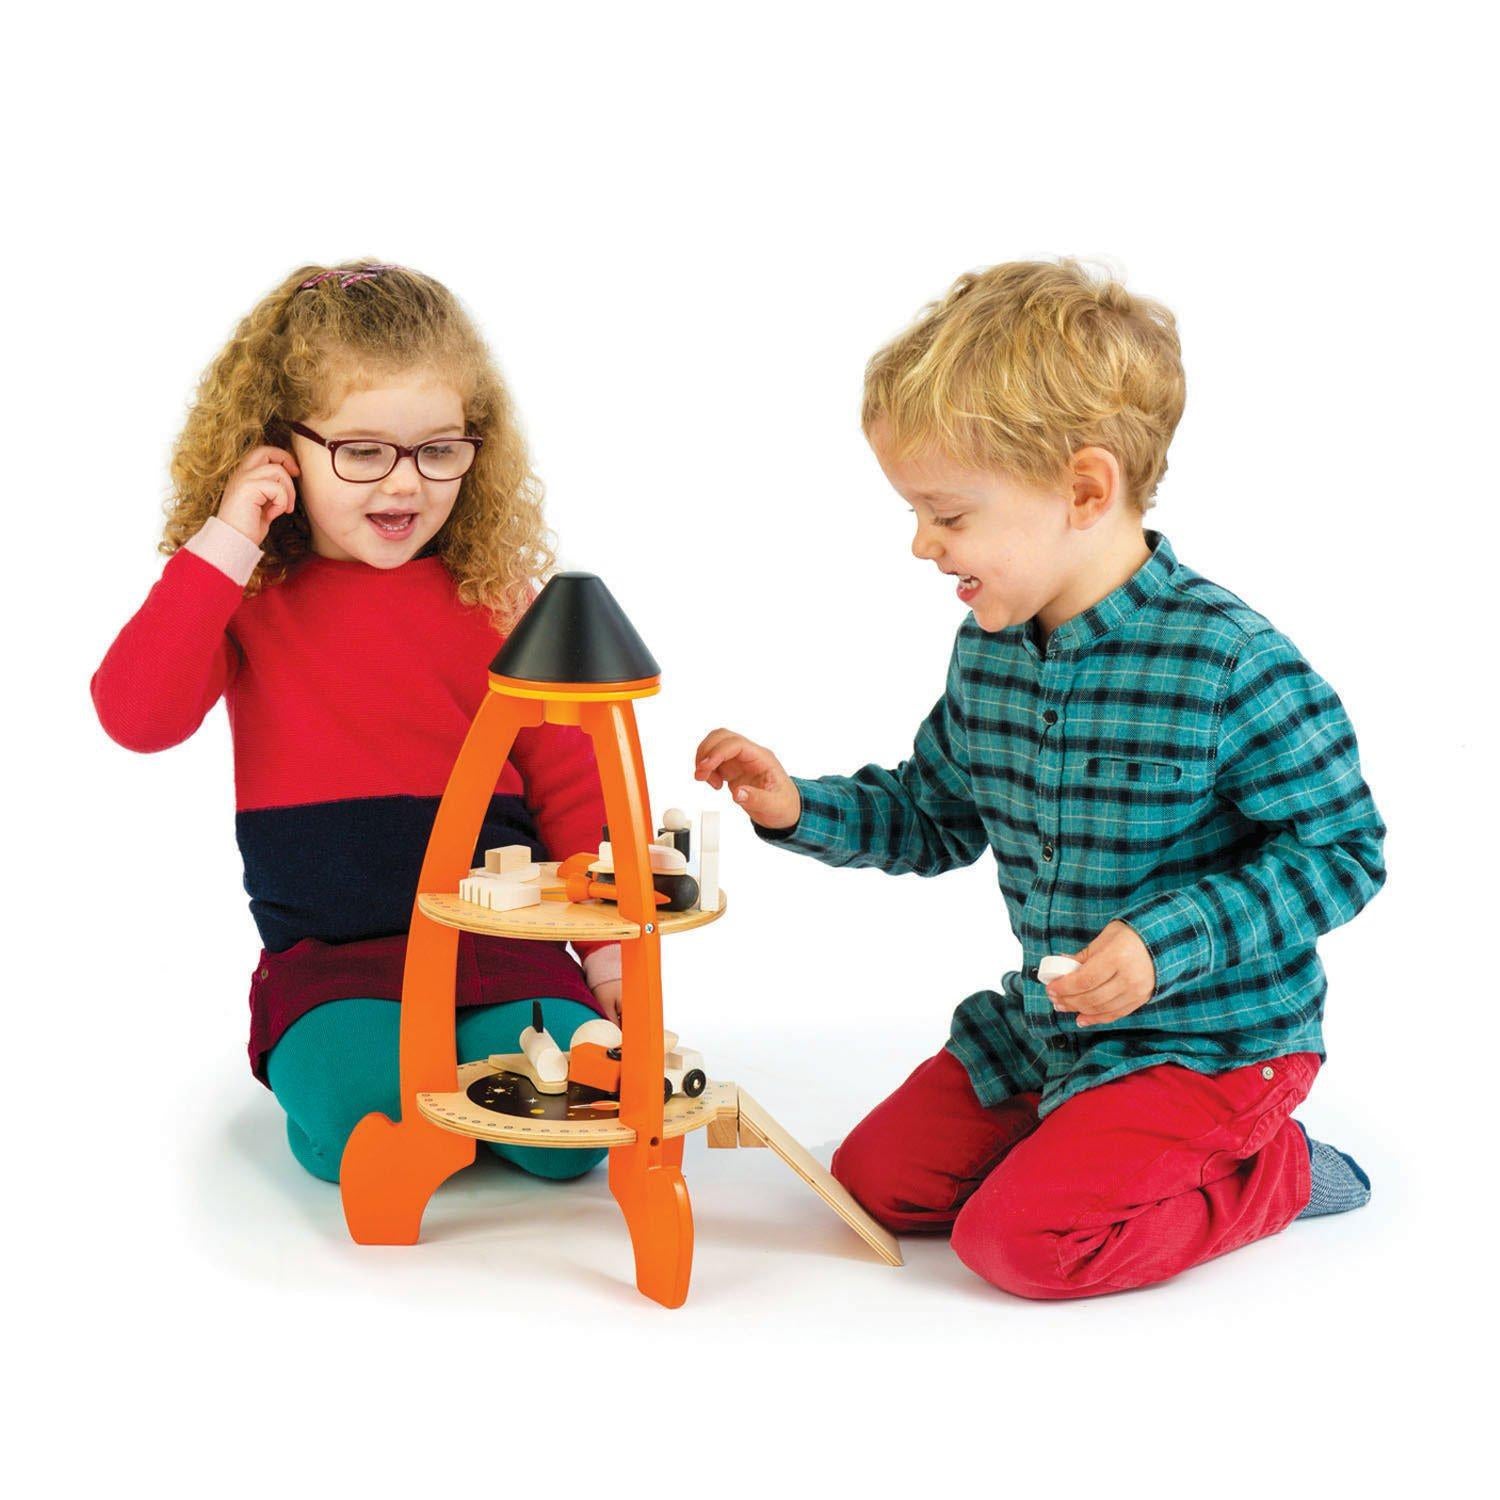 Tender Leaf Toys Cosmic Rocket Set | Wooden Toy Play Set For Kids | Lifestyle: 2 Children Playing with Cosmic Rocket Set | BeoVERDE.ie